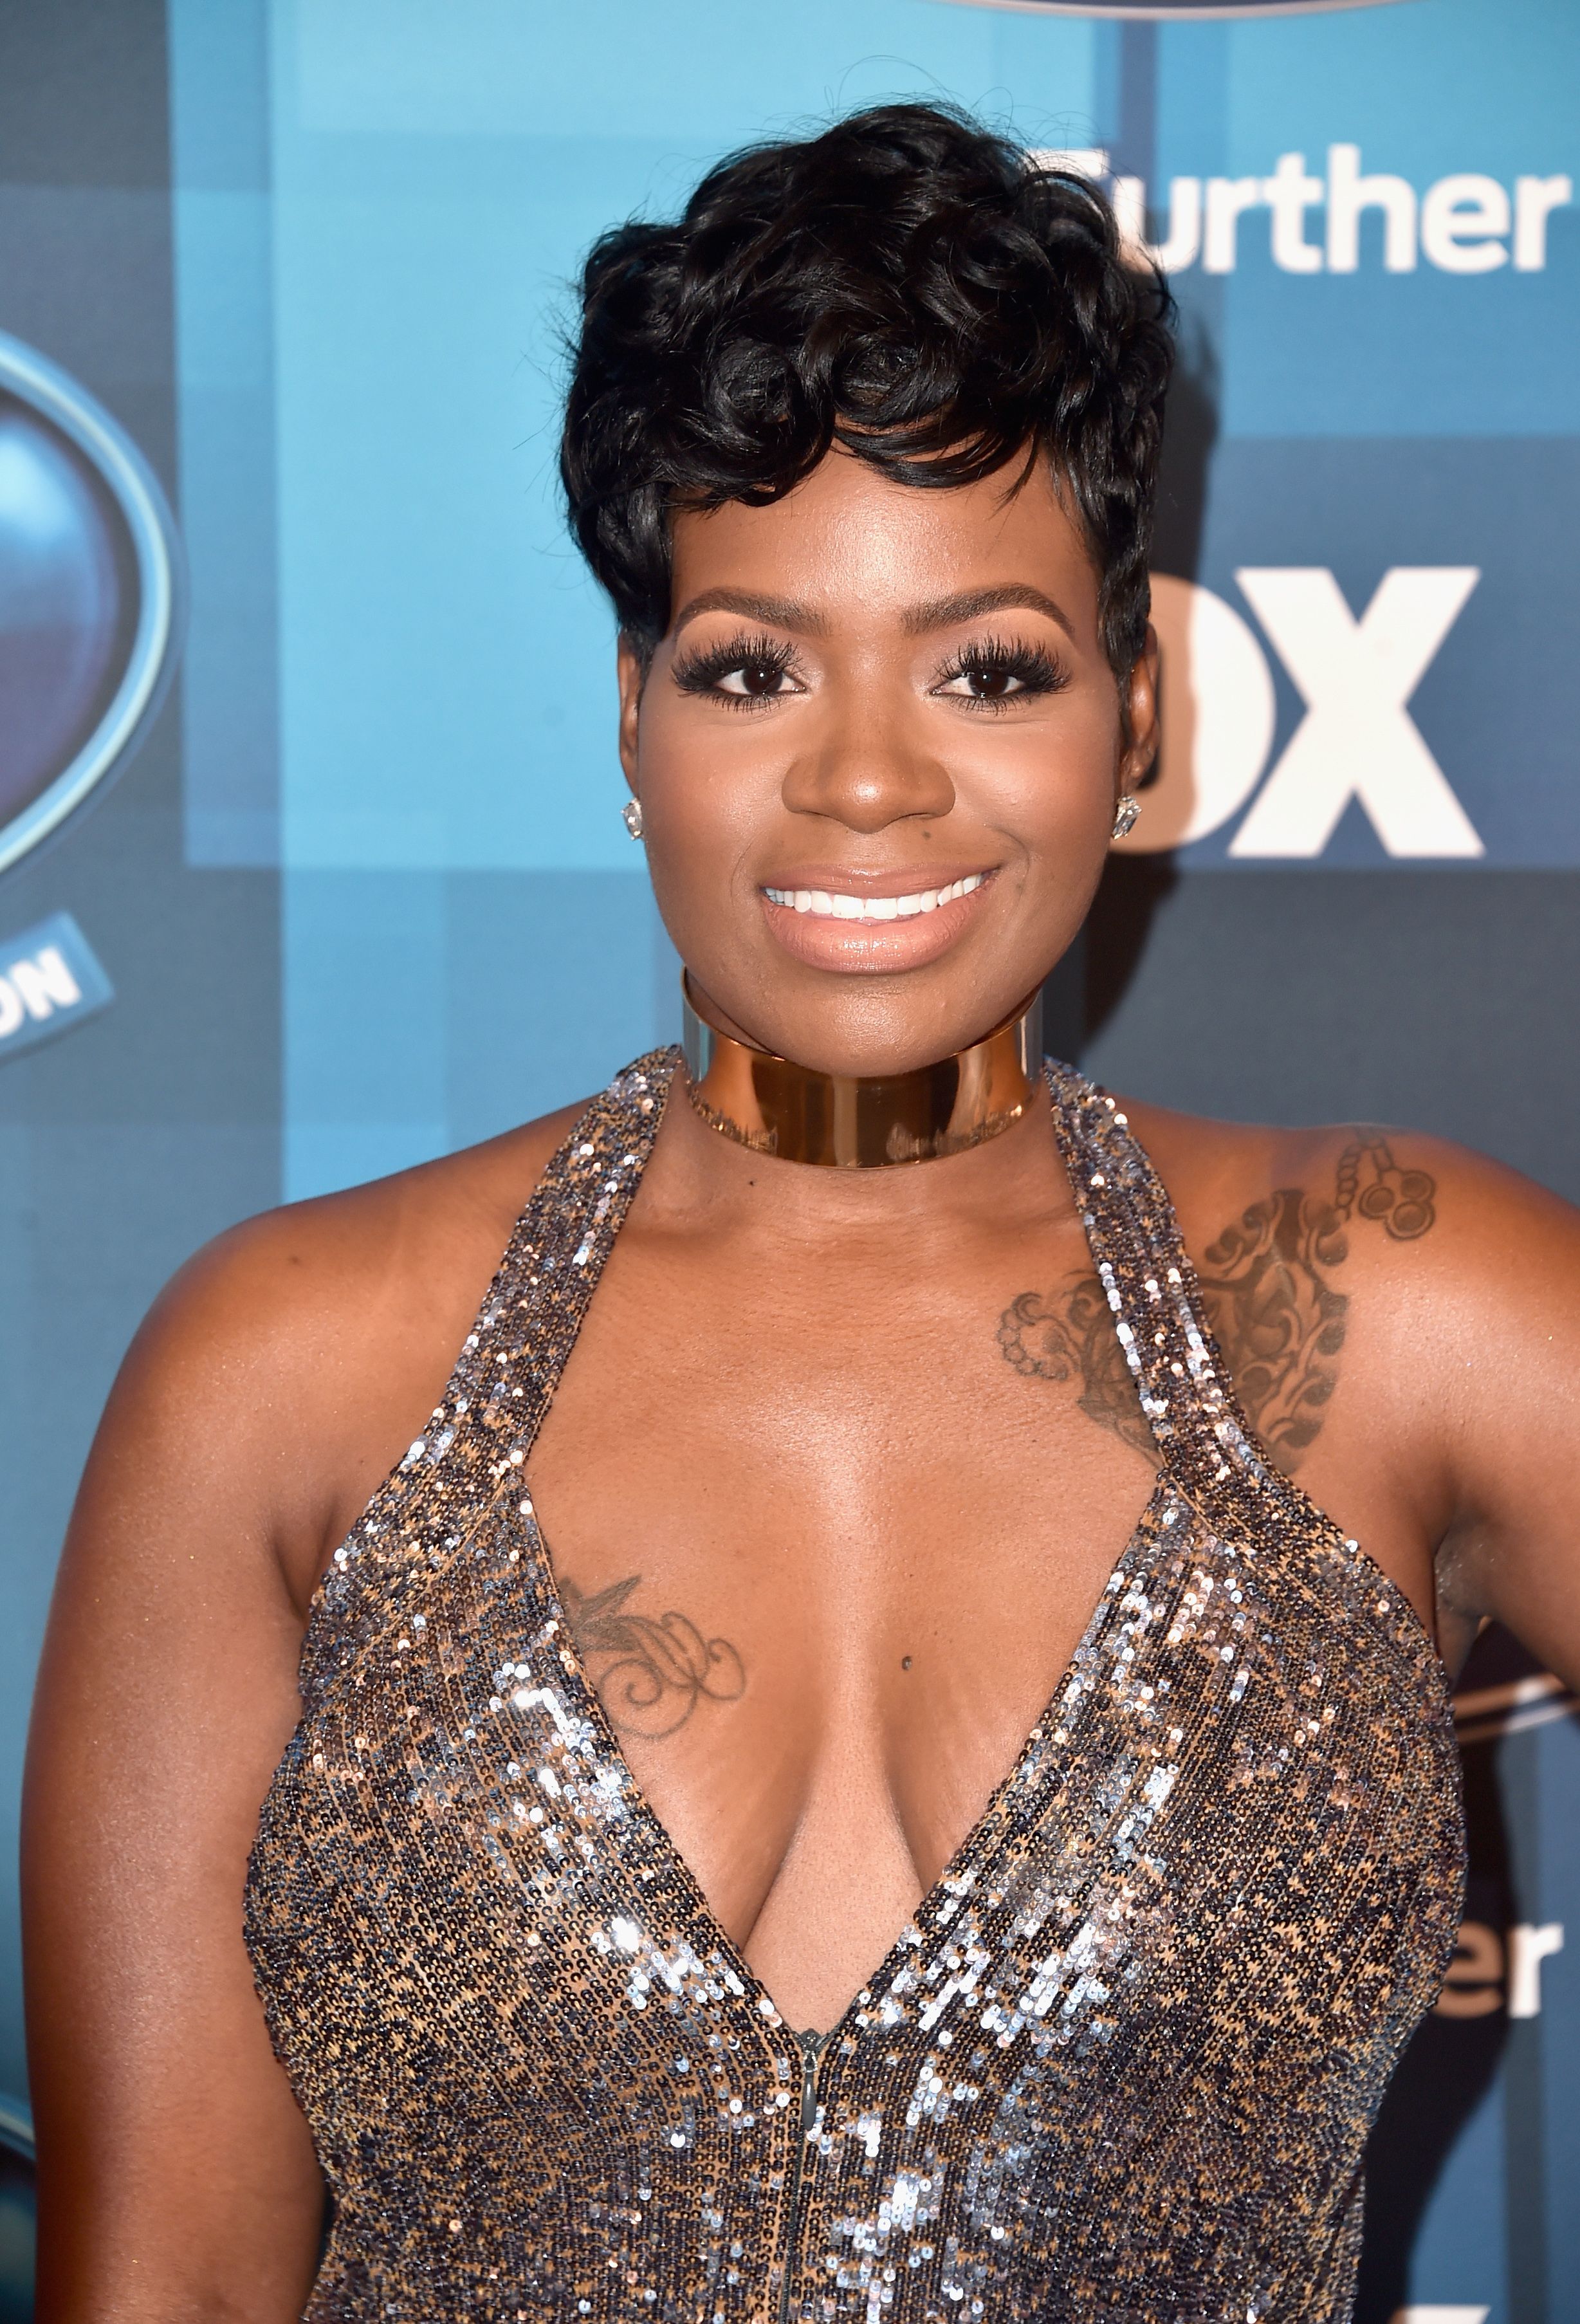 Fantasia at the "American Idol" finale on April 7, 2016 in California | Photo: Getty Images